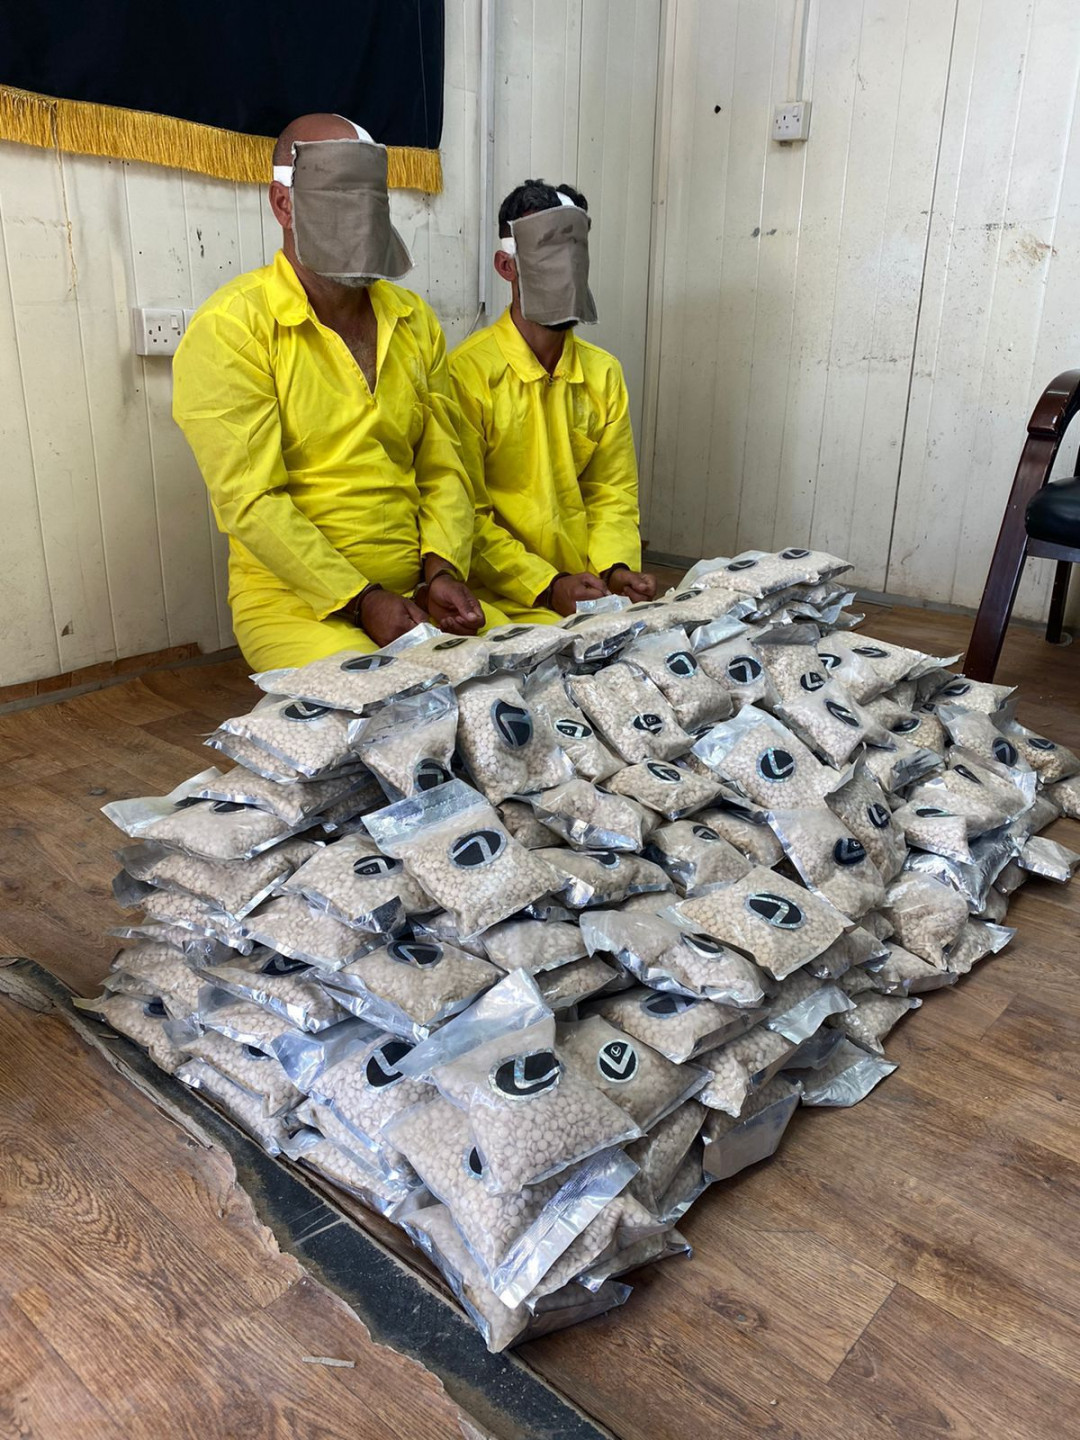 Iraqi intelligence agency thwarts an attempt to smuggle 100 kg of narcotics into the country